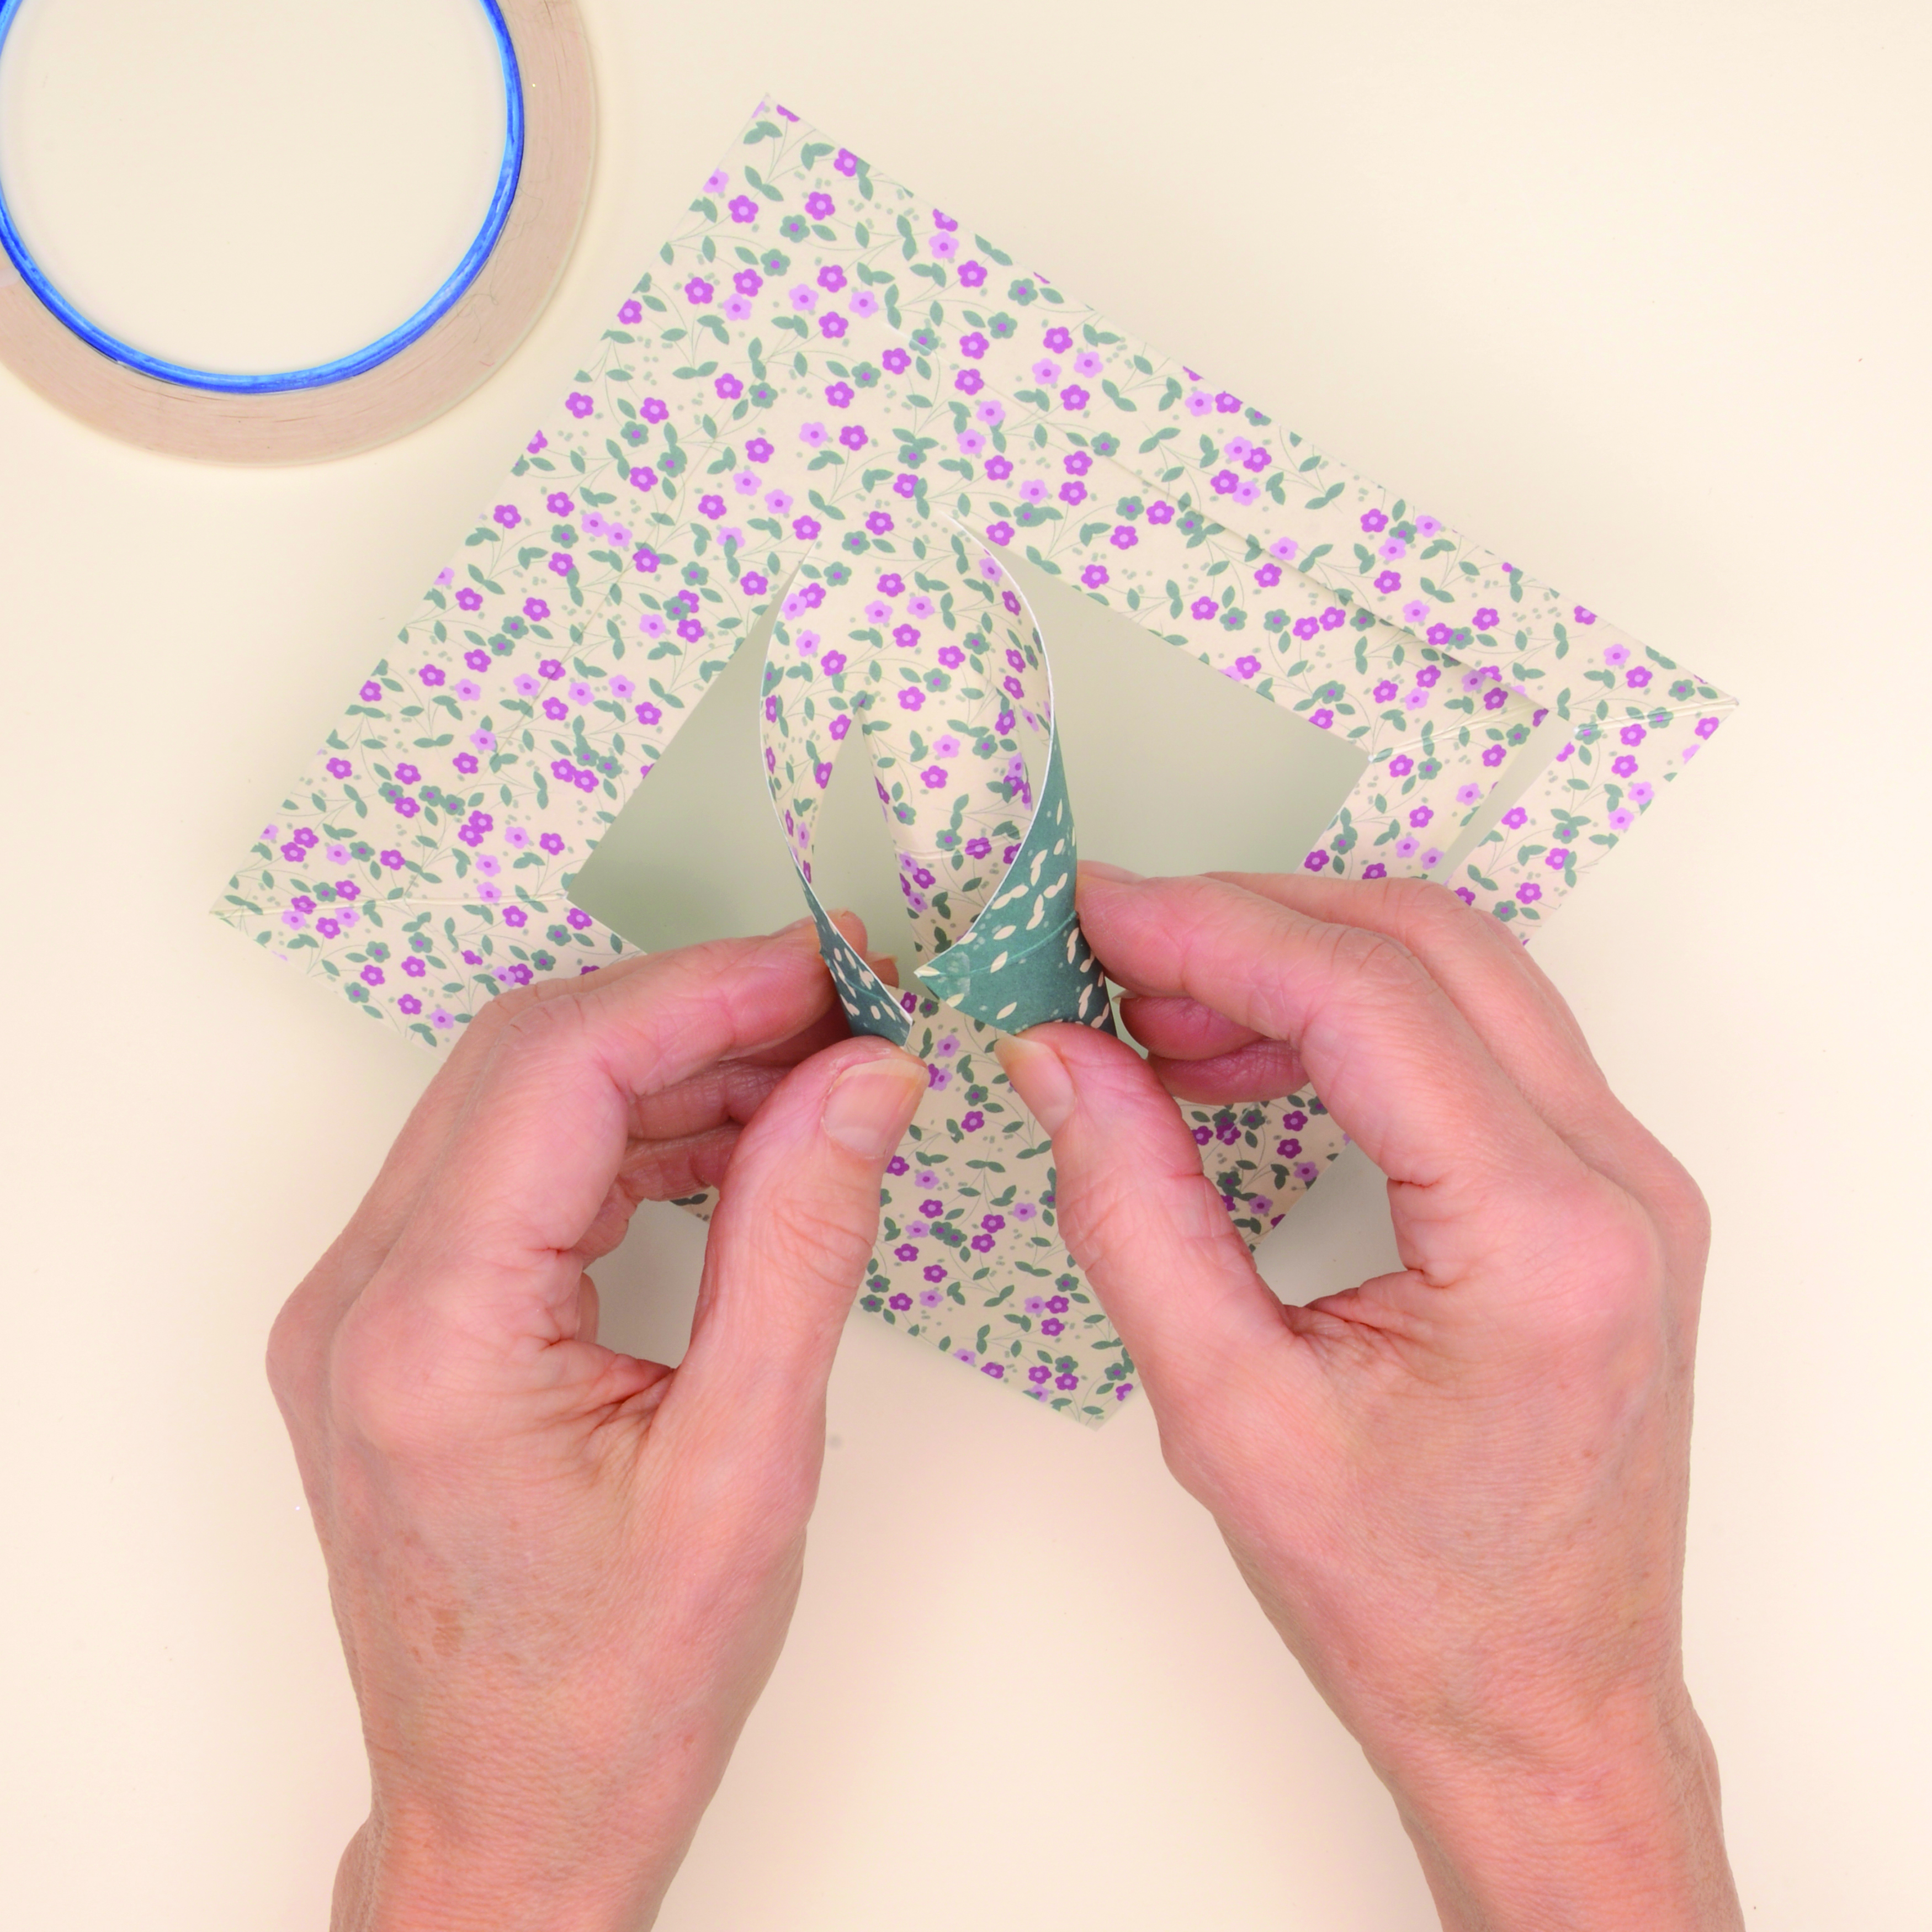 How to make a 3d paper snowflake – step 5